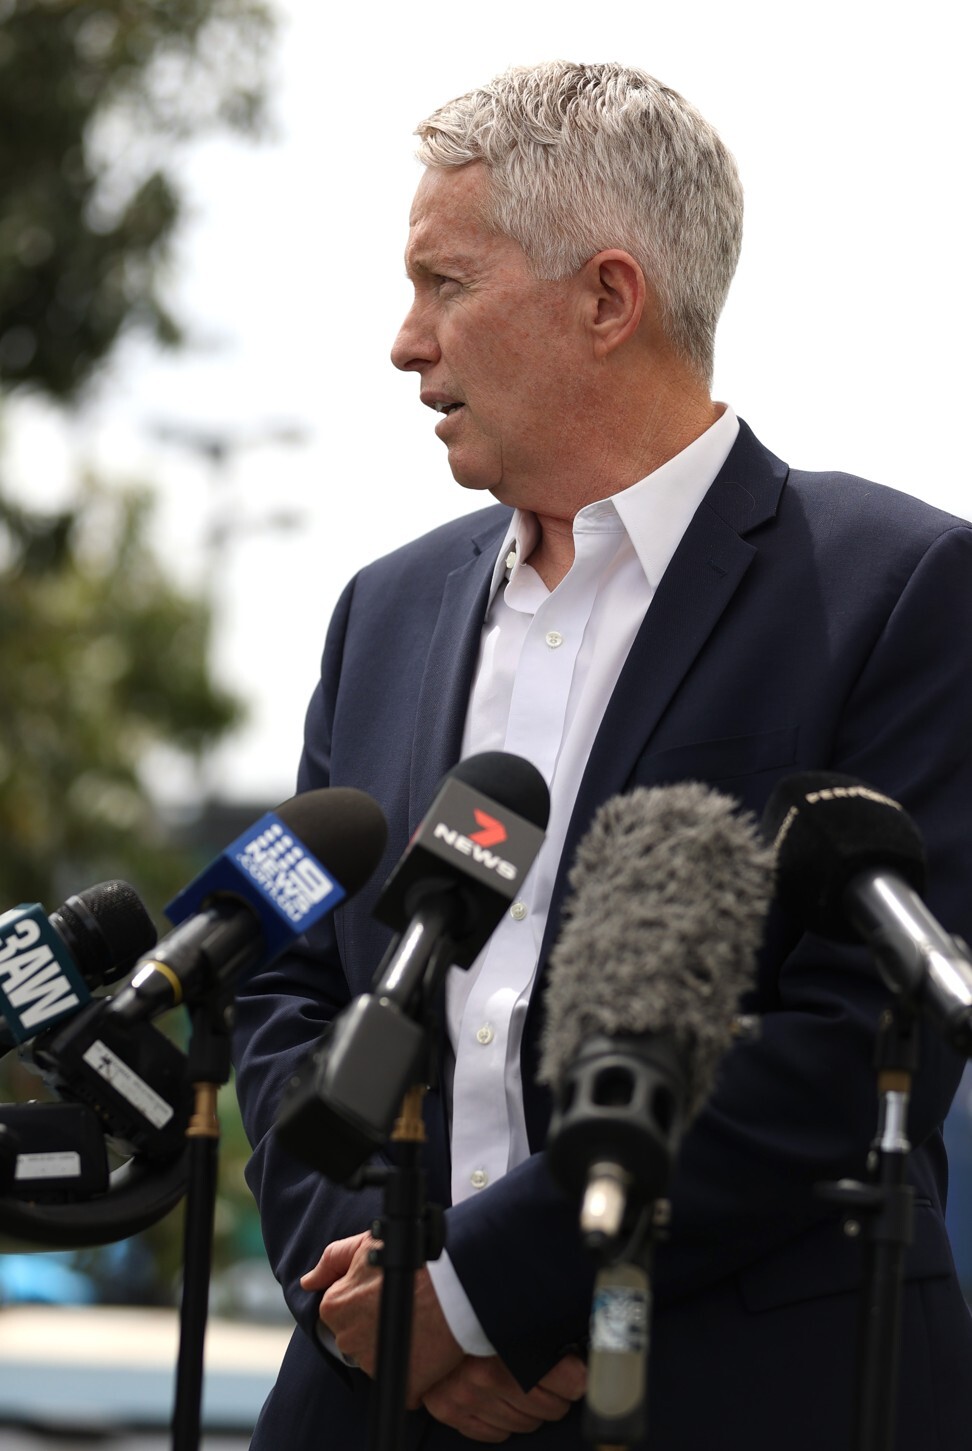 Craig Tiley, CEO of Tennis Australia, speaks to media during a press conference. Photo: Reuters